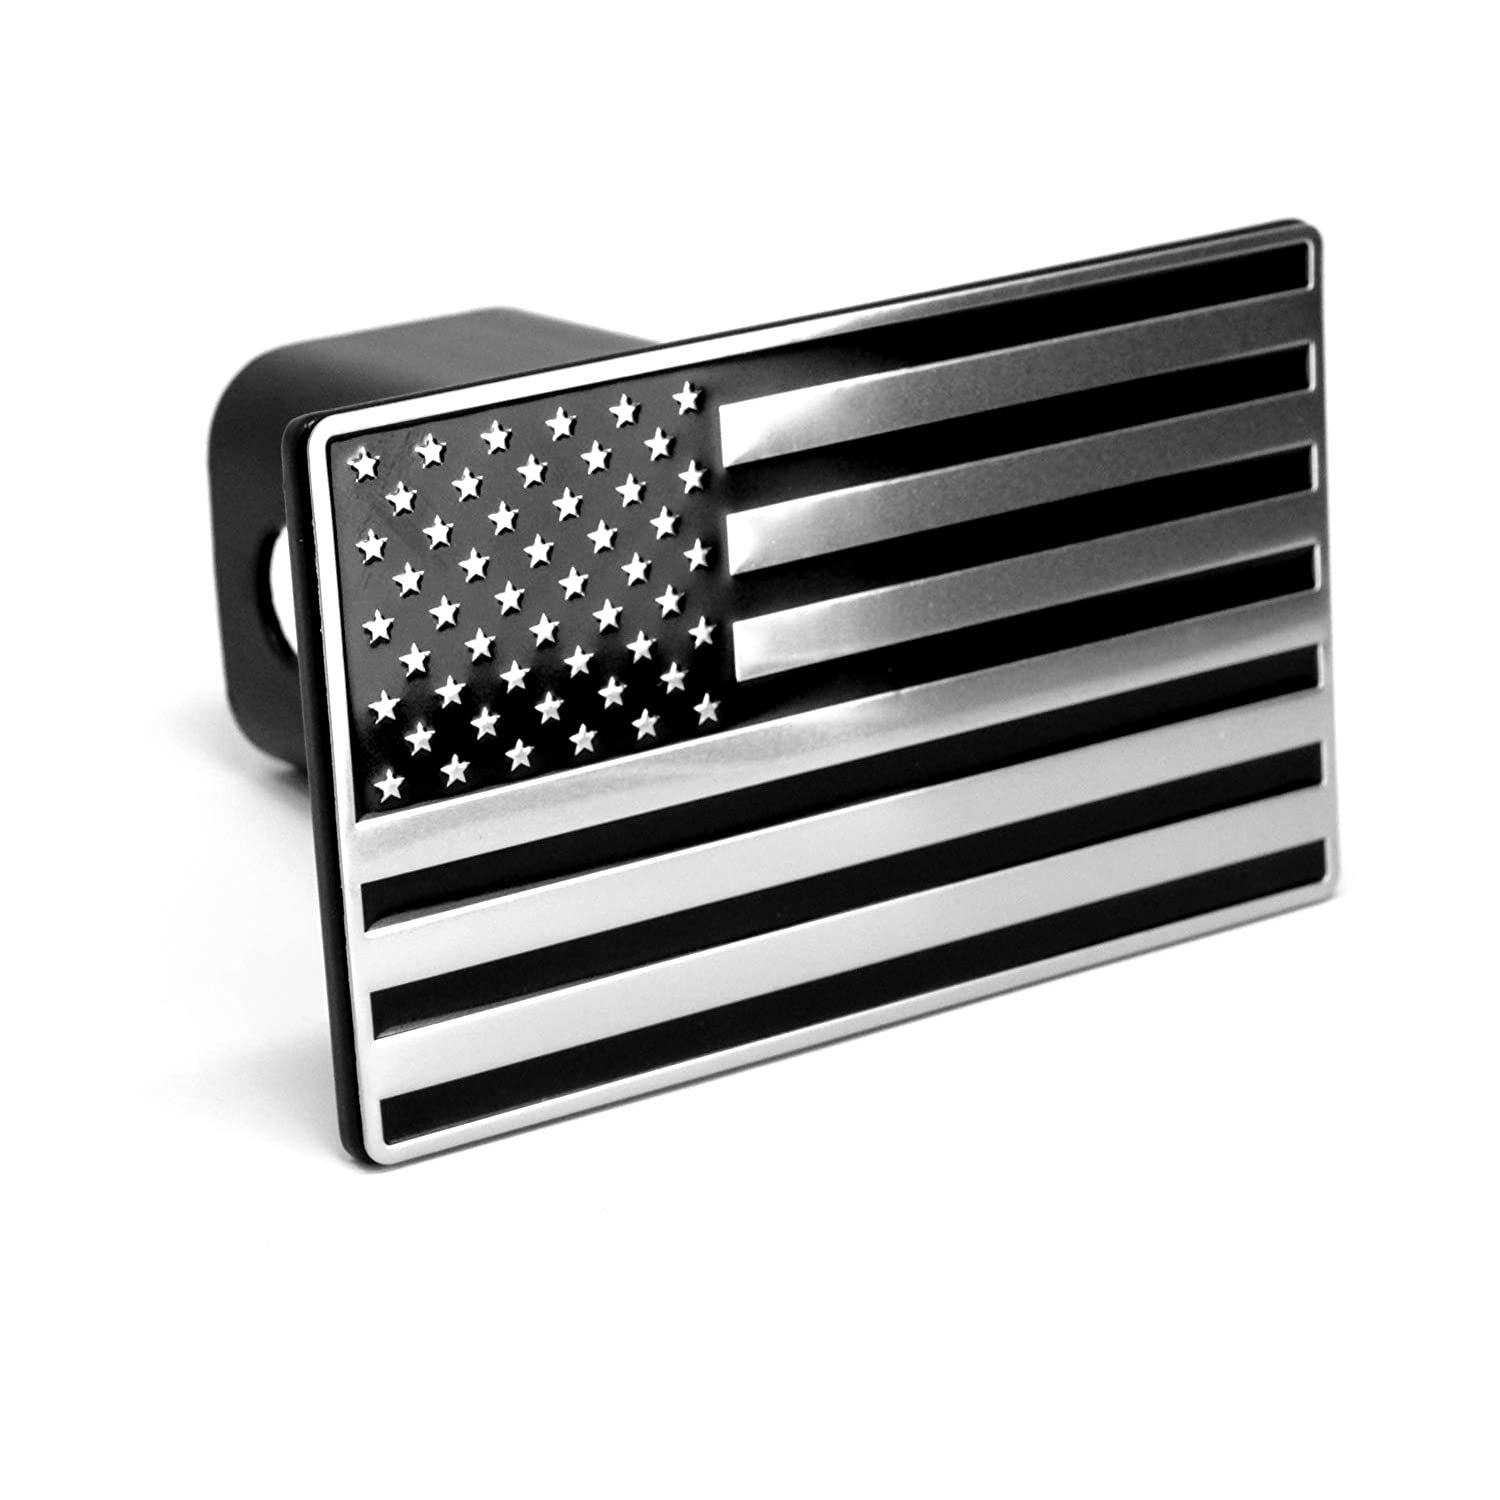 Usa Us American Black & Chrome L Trailer Hitch Cover Fits 2 Receivers